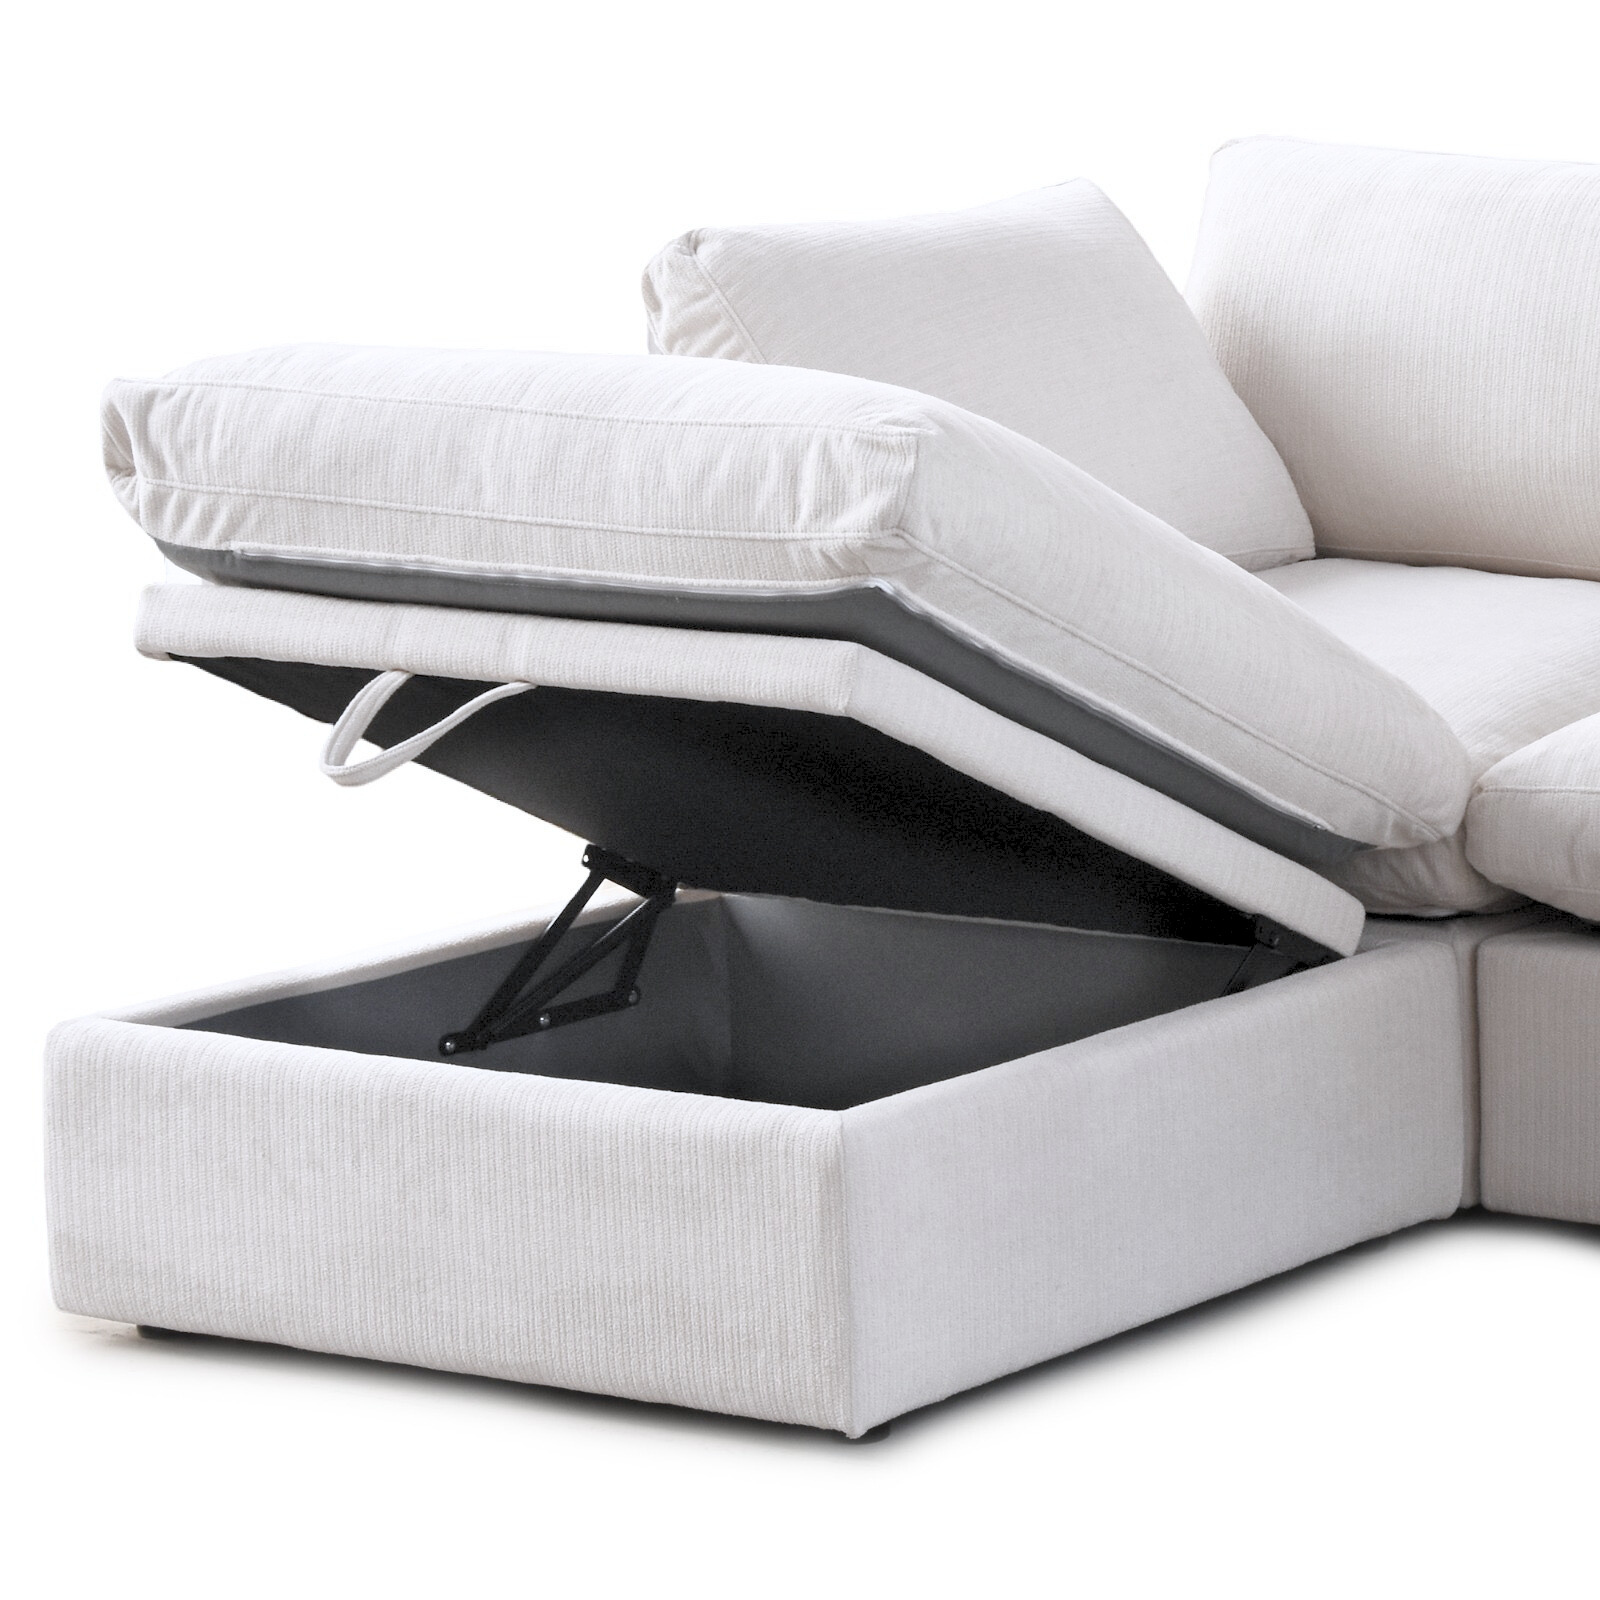 The Comfy Cloud 4-Piece Set - FREE Shipping Included